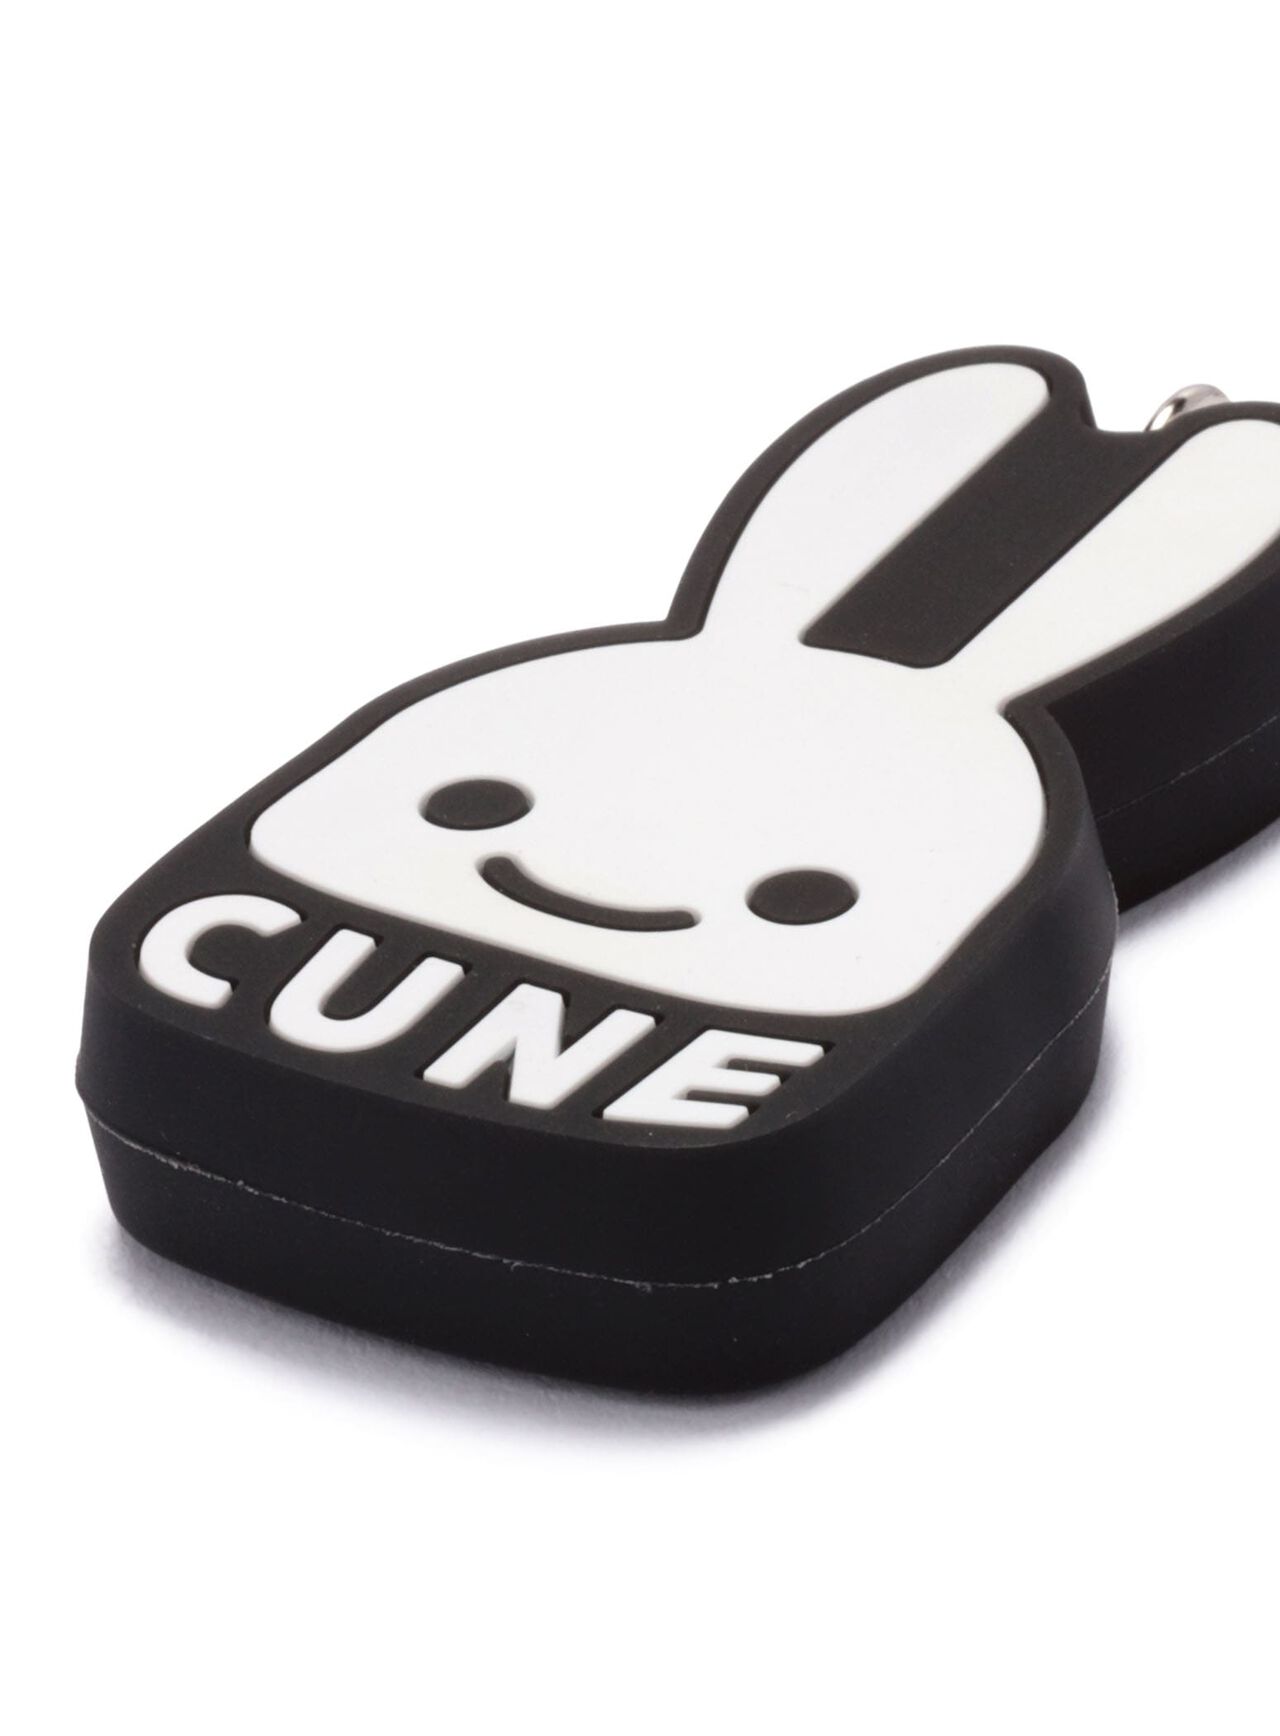 Rubber Key Chain CUNE Rabbit,ONE, large image number 2